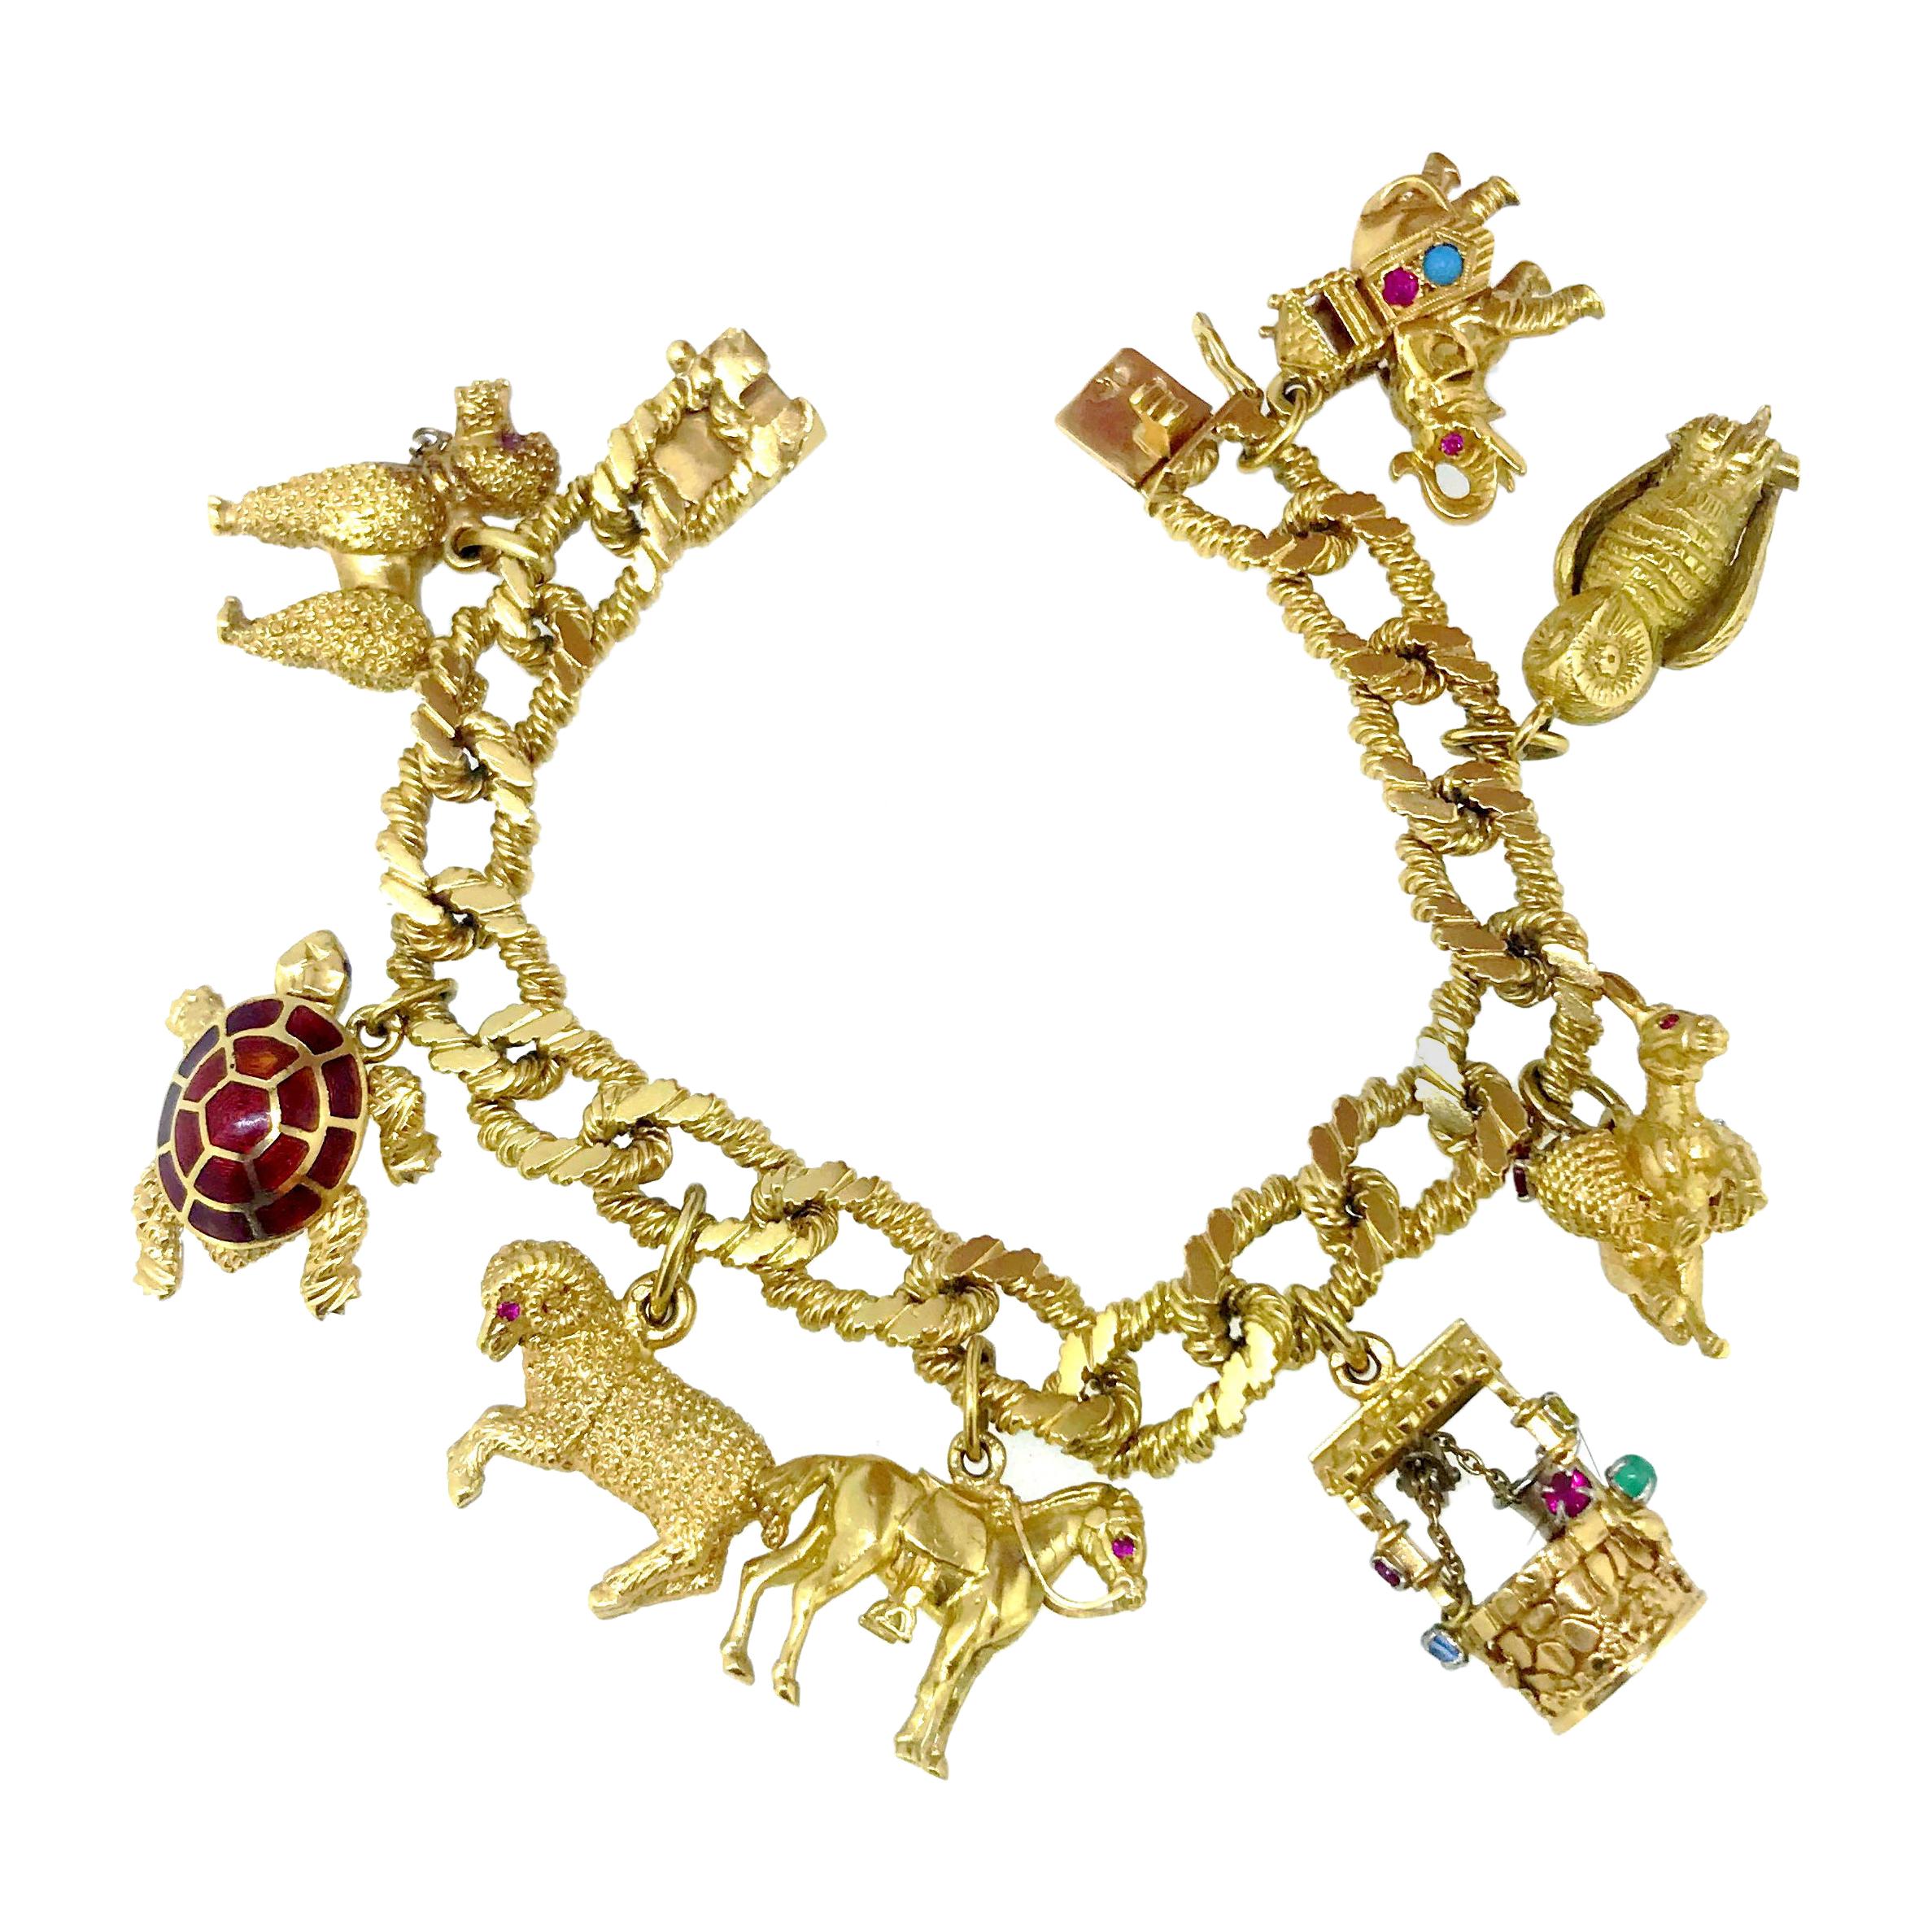 Vintage Animals Charms Link Yellow Gold Bracelet